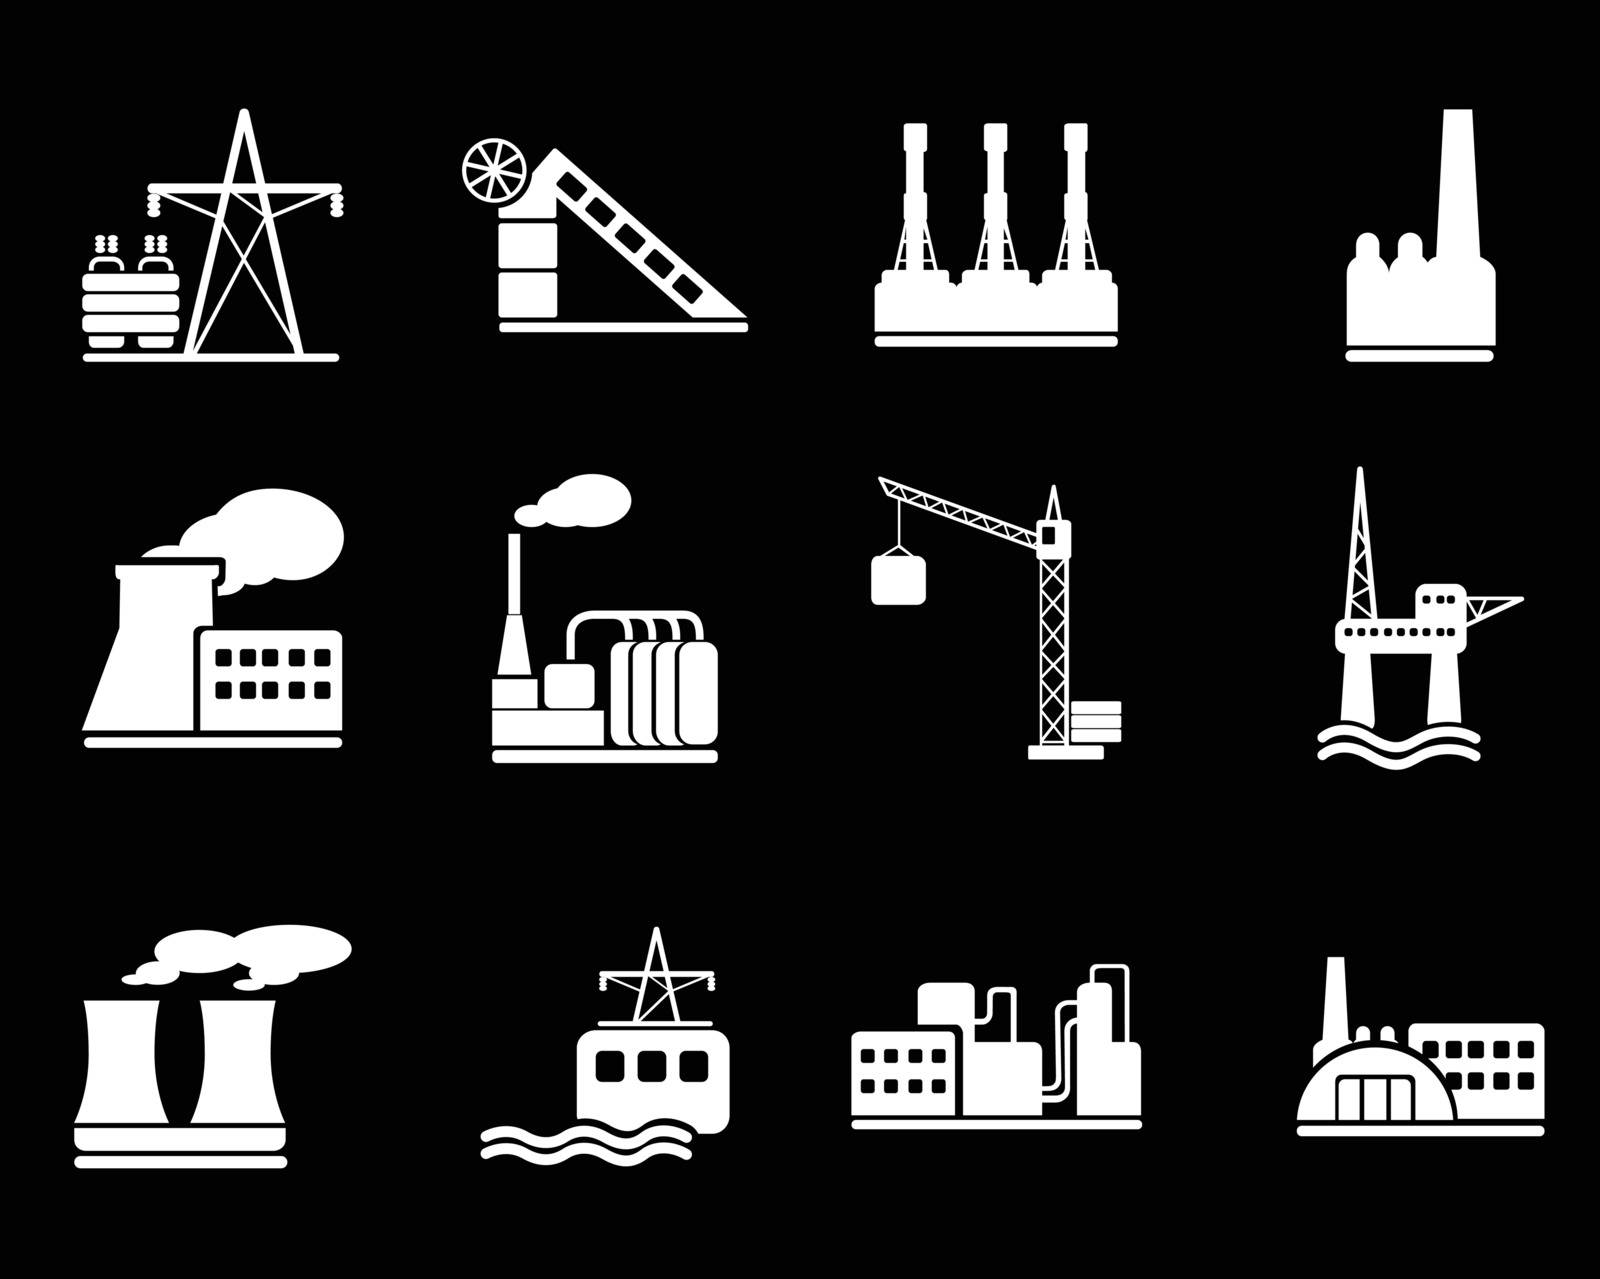 Factory and Industry  simply symbols for web and user interface